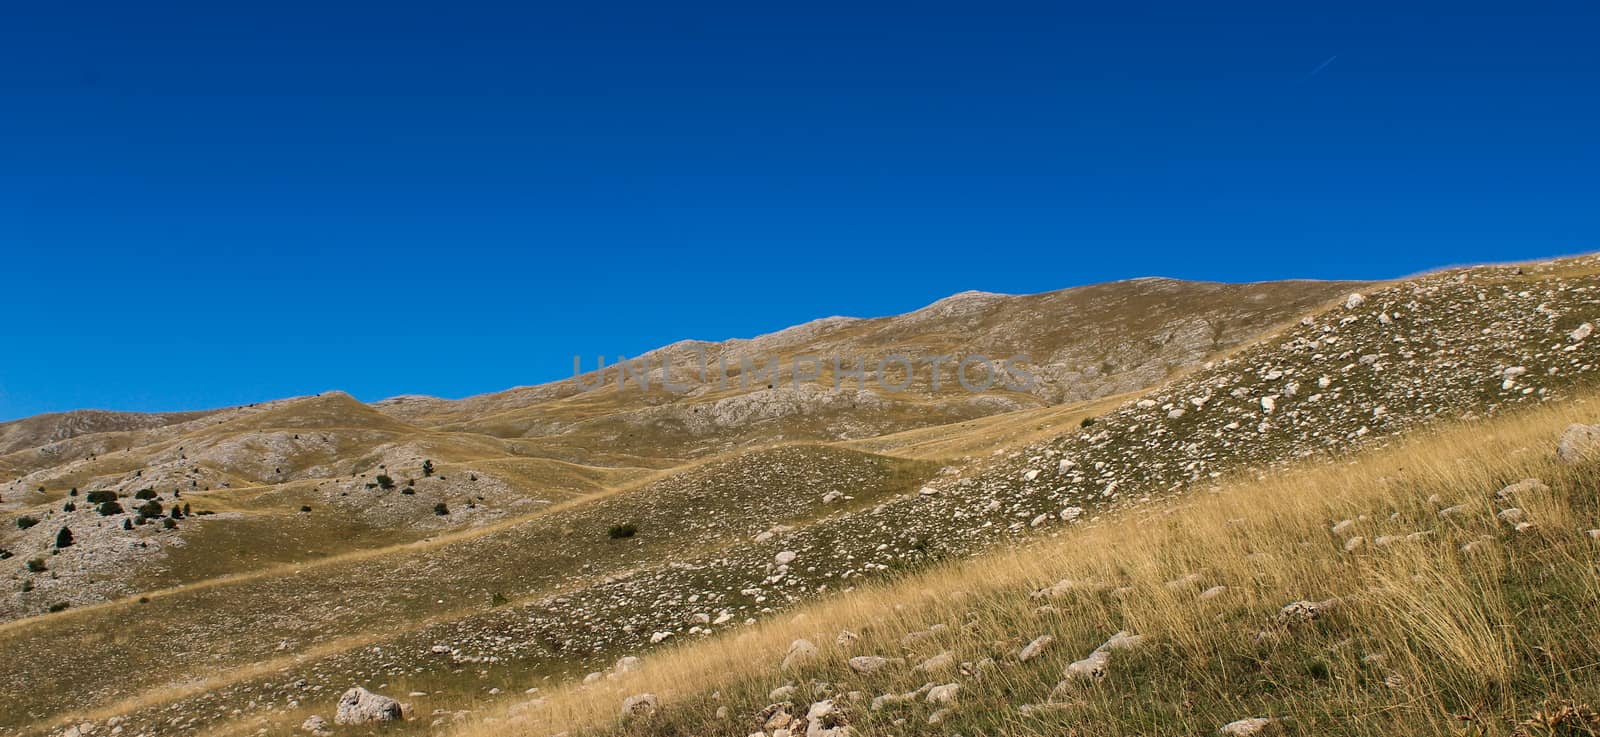 Banner of the rocky landscape of the mountain Bjelasnica. Autumn view of Bjelasnica mountain, Bosnia and Herzegovina.